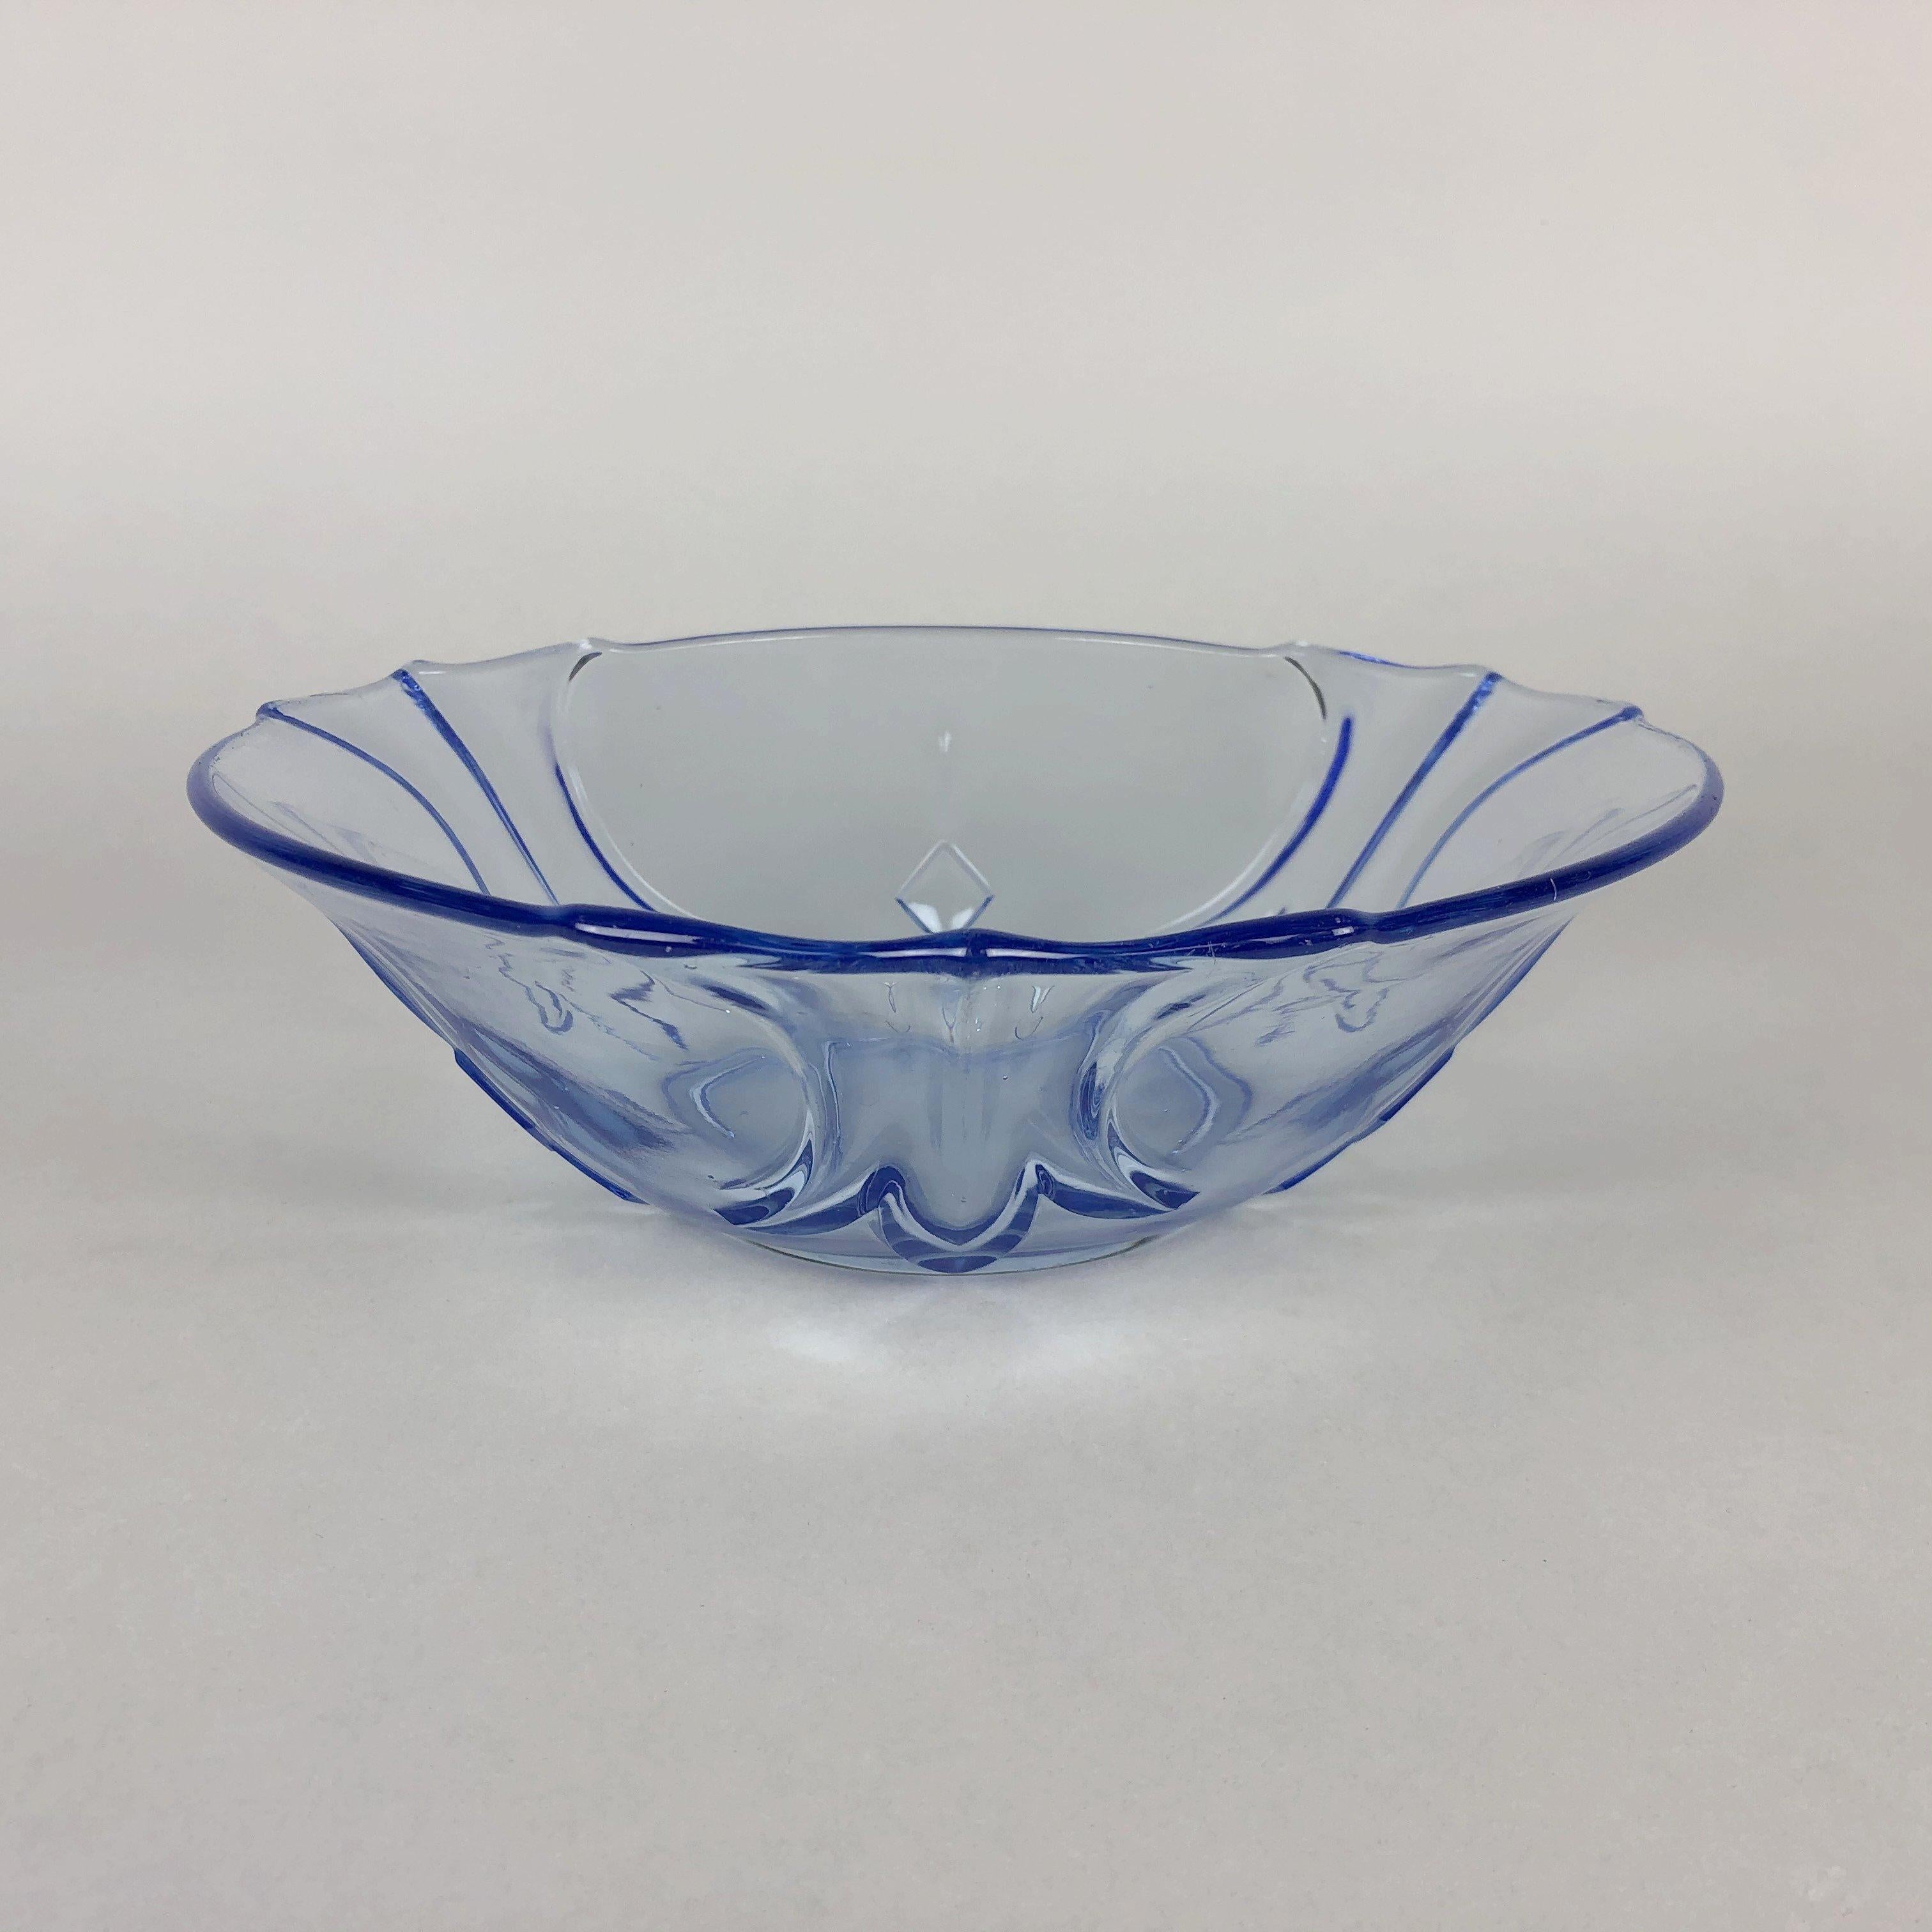 Lovely blue transparent vintage glass bowl. The bowl is approximately 8 cm (3.15 inch) and 24,5 cm (9.65 inch) wide.